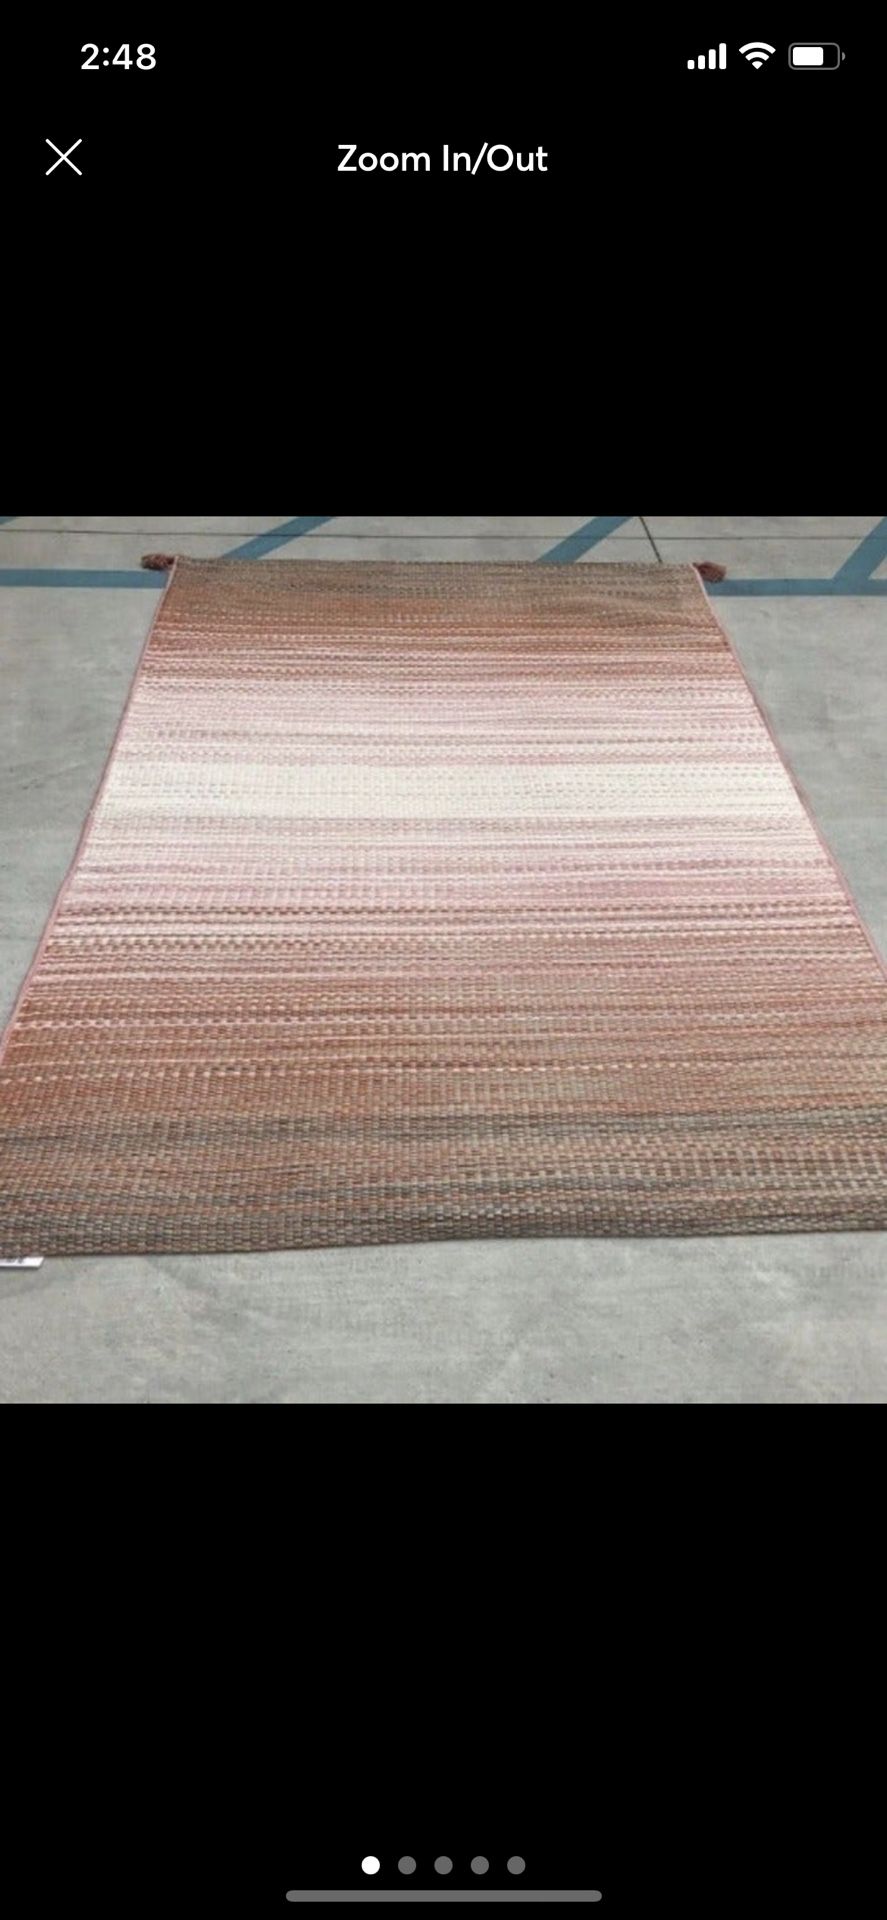 7' x 10' 7x10 Opalhouse Warm Ombre Outdoor Rug Carpet Target Brand Pink Salmon